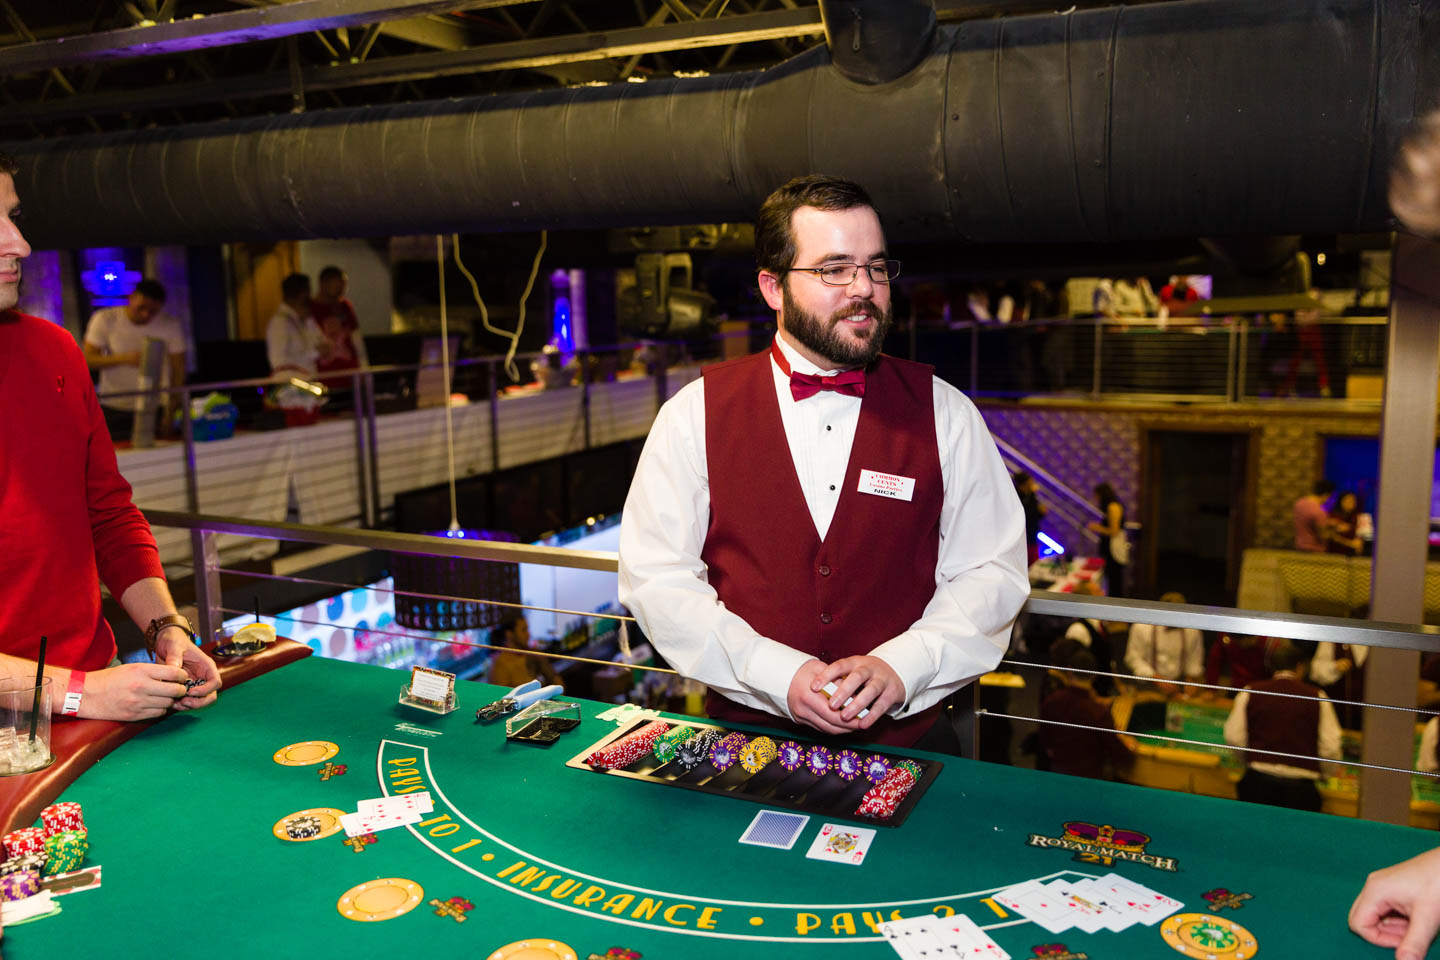 Is Being a Casino Croupier As Exciting As It Sounds?